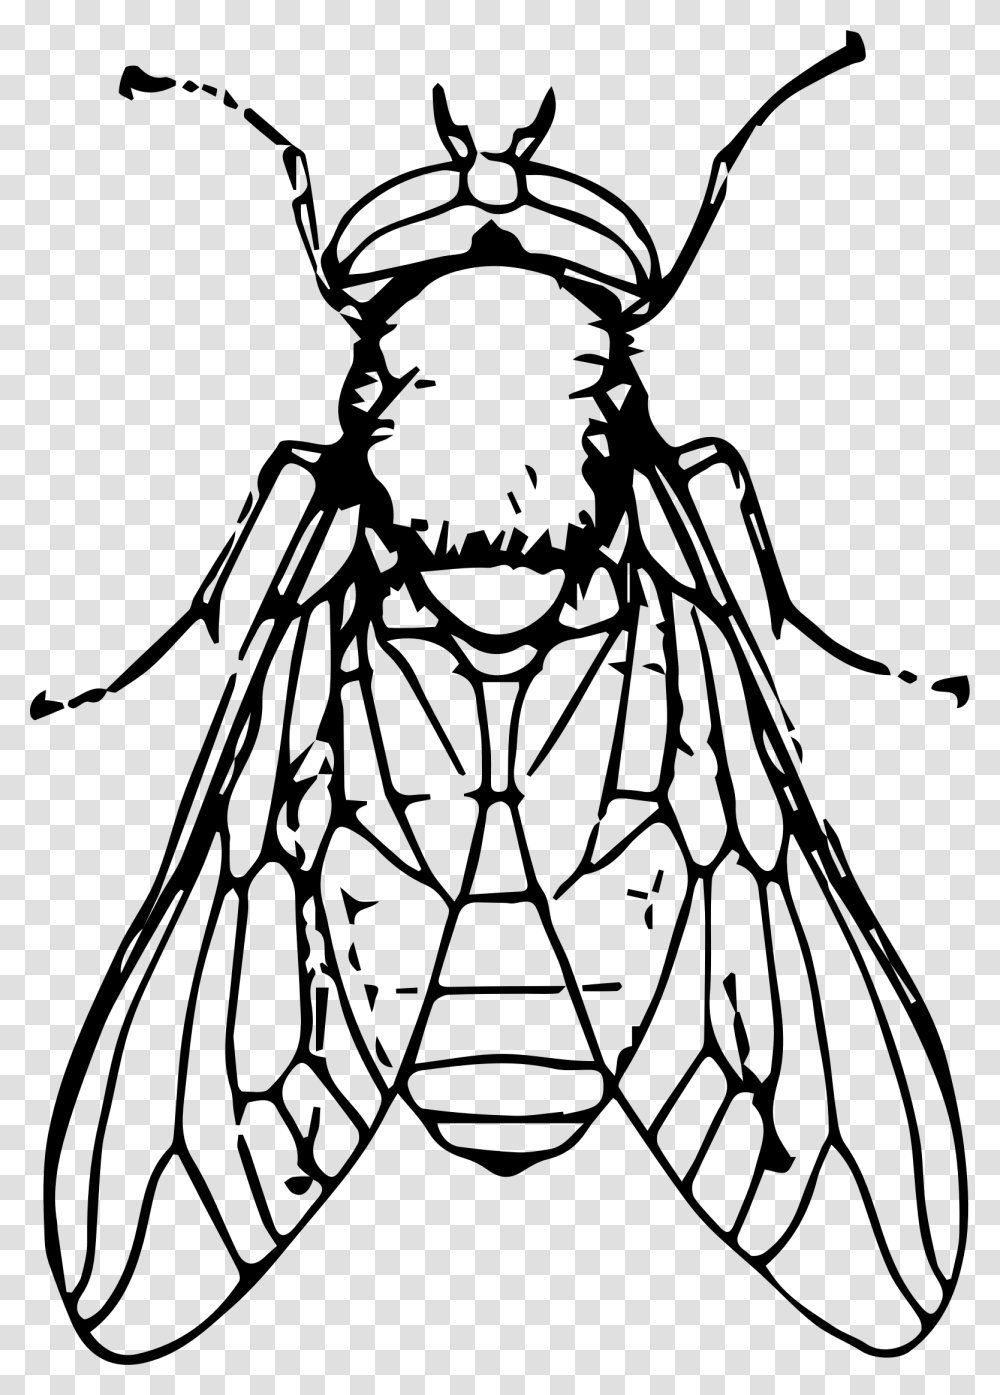 Black Horse Fly File Clip Art Black And White Fly, Gray, World Of Warcraft Transparent Png